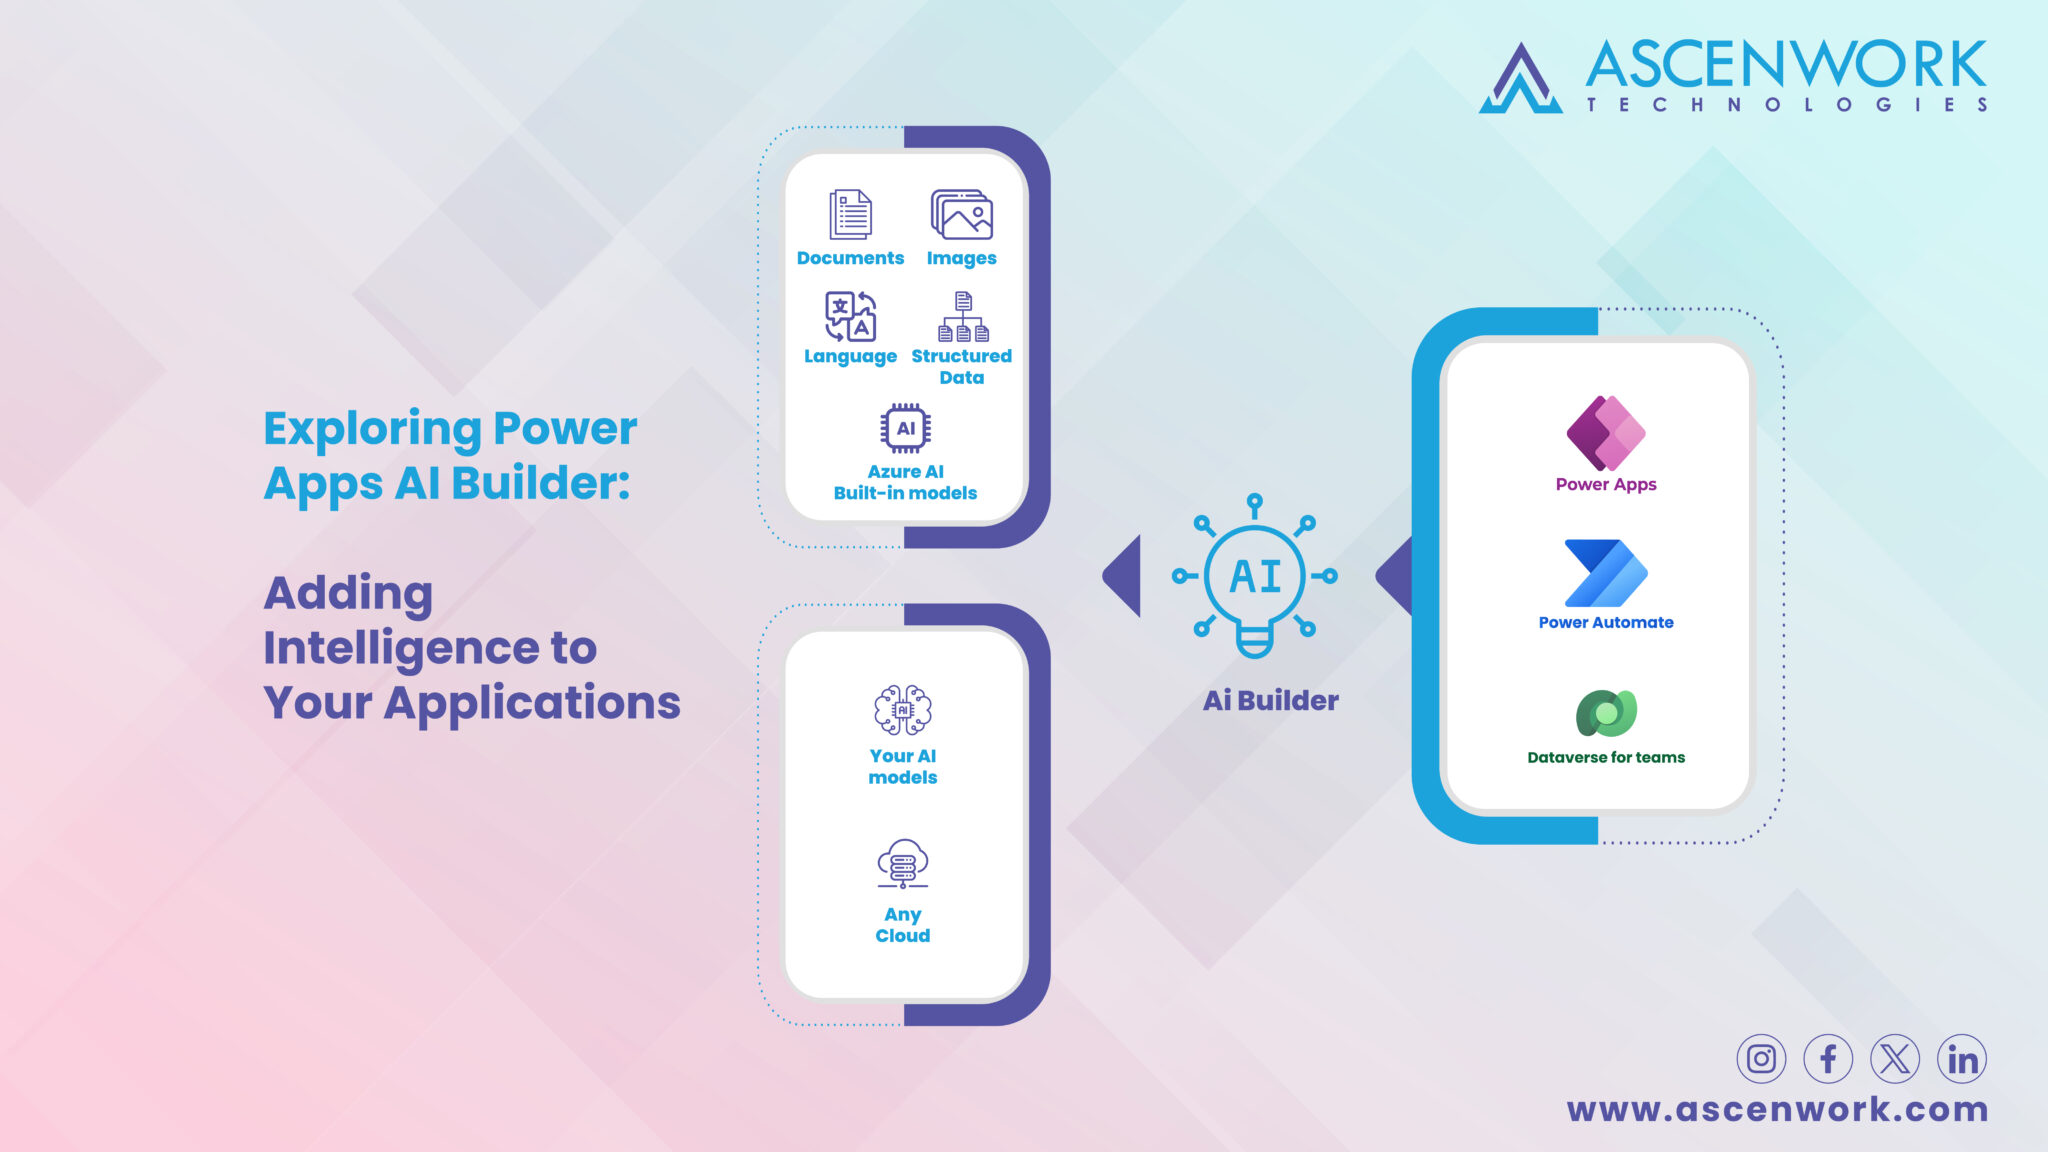 Using AI and Machine Learning in Power Apps: Adding Intelligent Features